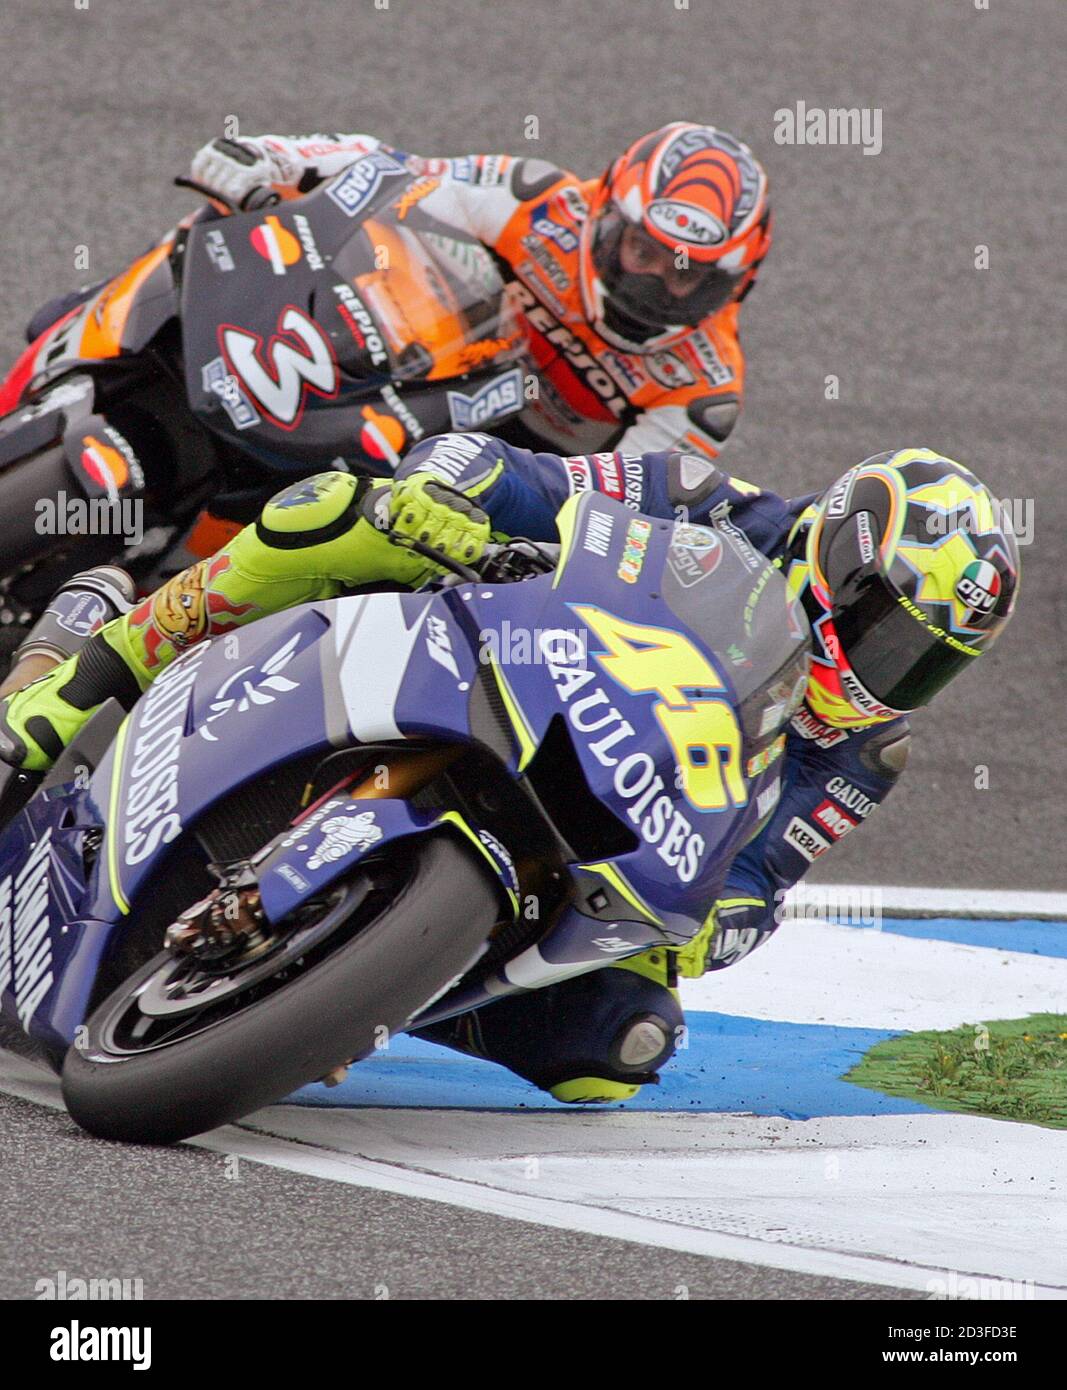 Italy's Valentino Rossi (R) on a MotoGP Yamaha and Max Biaggi (L) on a  MotoGP Honda take a curve during the Portugal's Grand Prix in Estoril April  17, 2005. Brazil's Alex Barros